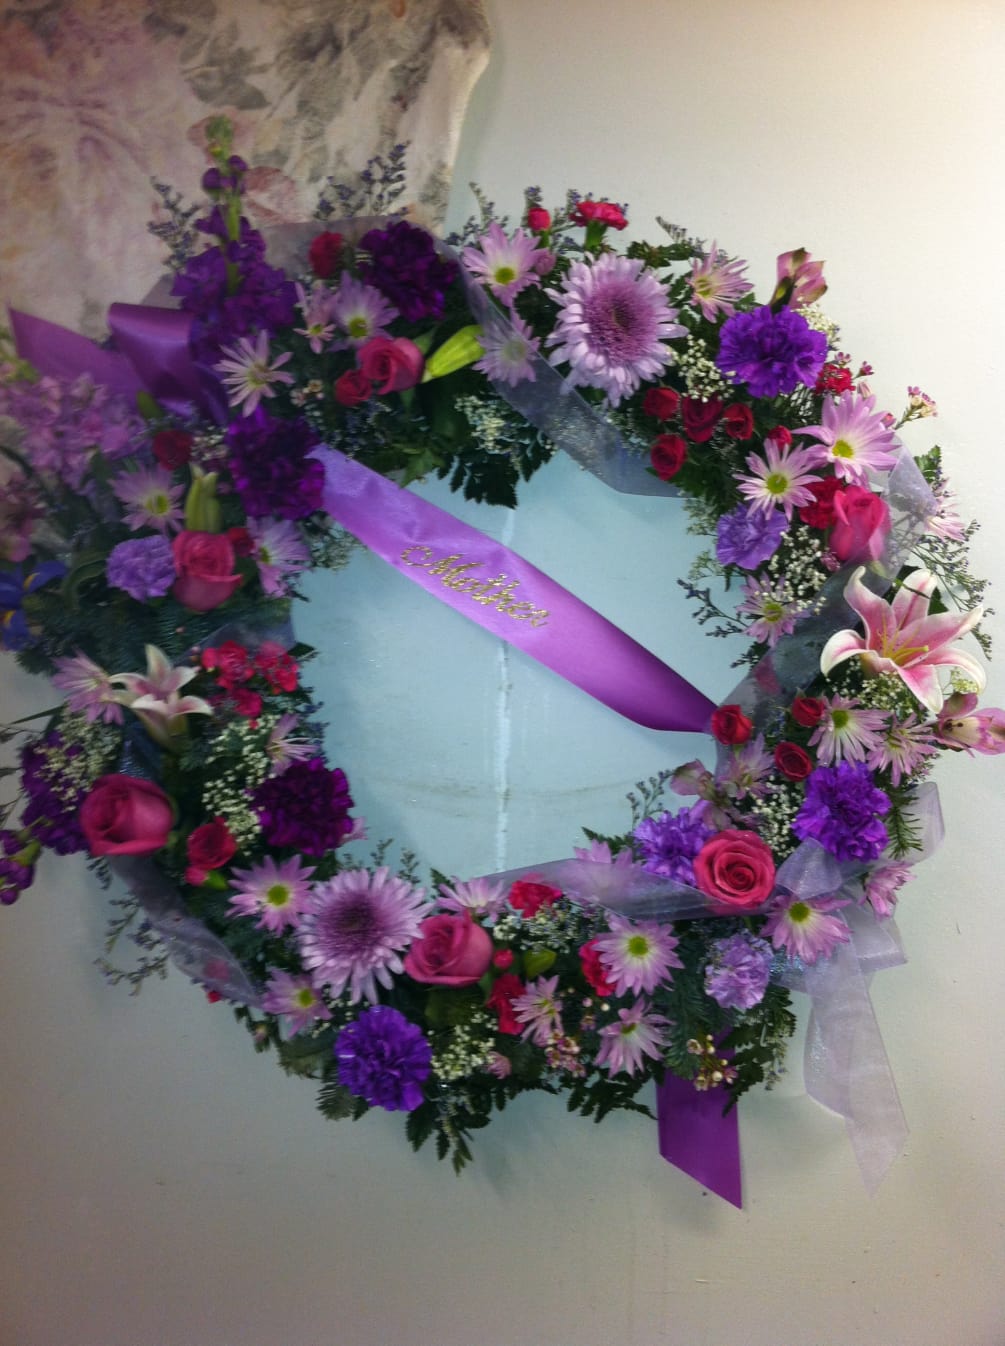 A beautiful fresh flower wreath in shades of purples for a Funeral